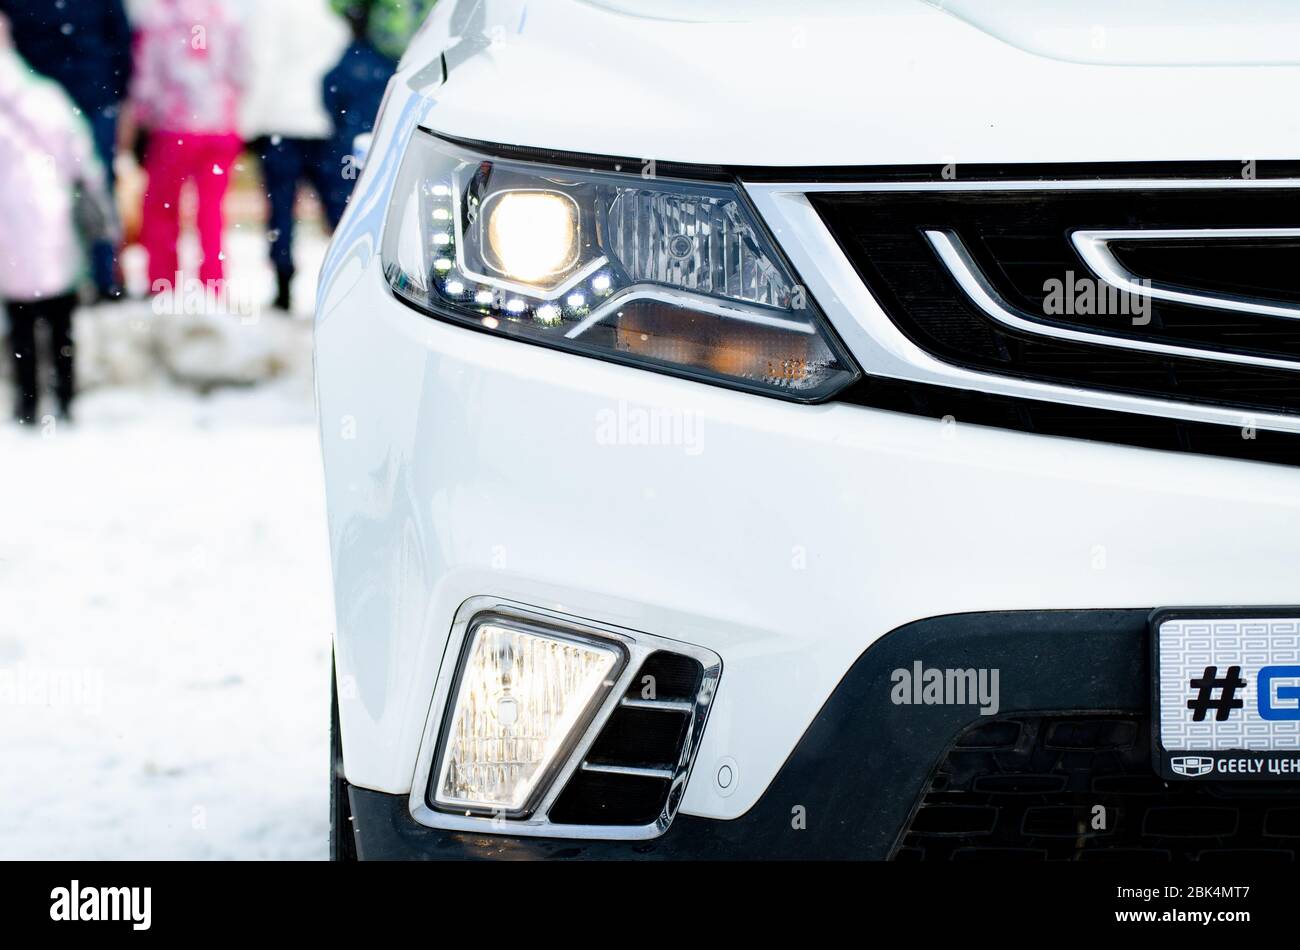 VOLOGDA, RUSSIA - FEBRUARY 28, 2020: The headlights and the hood of a new Geely car Stock Photo